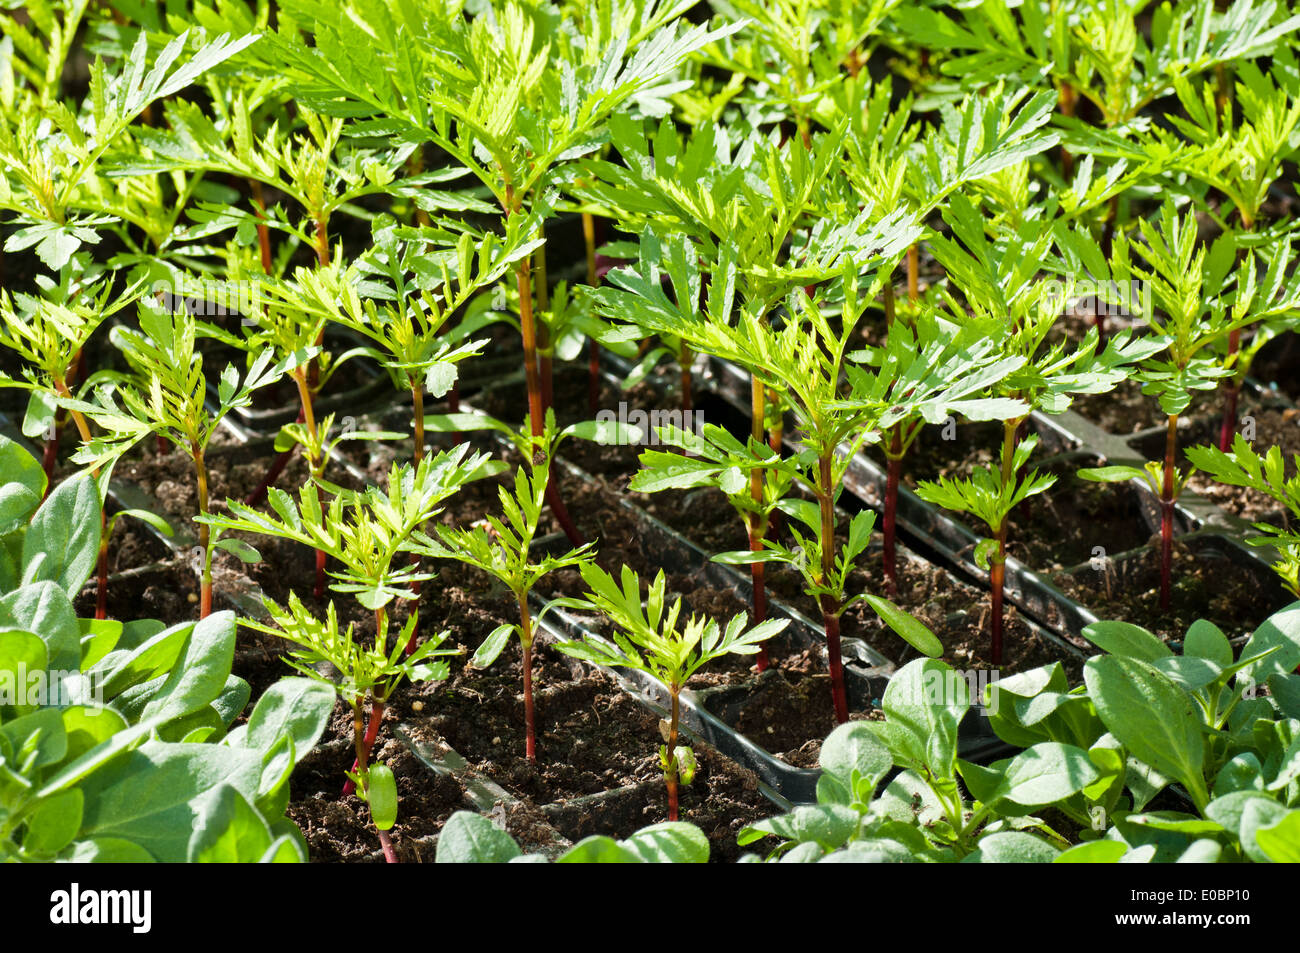 Marigold Plant Seedlings In Trays Stock Photo Alamy